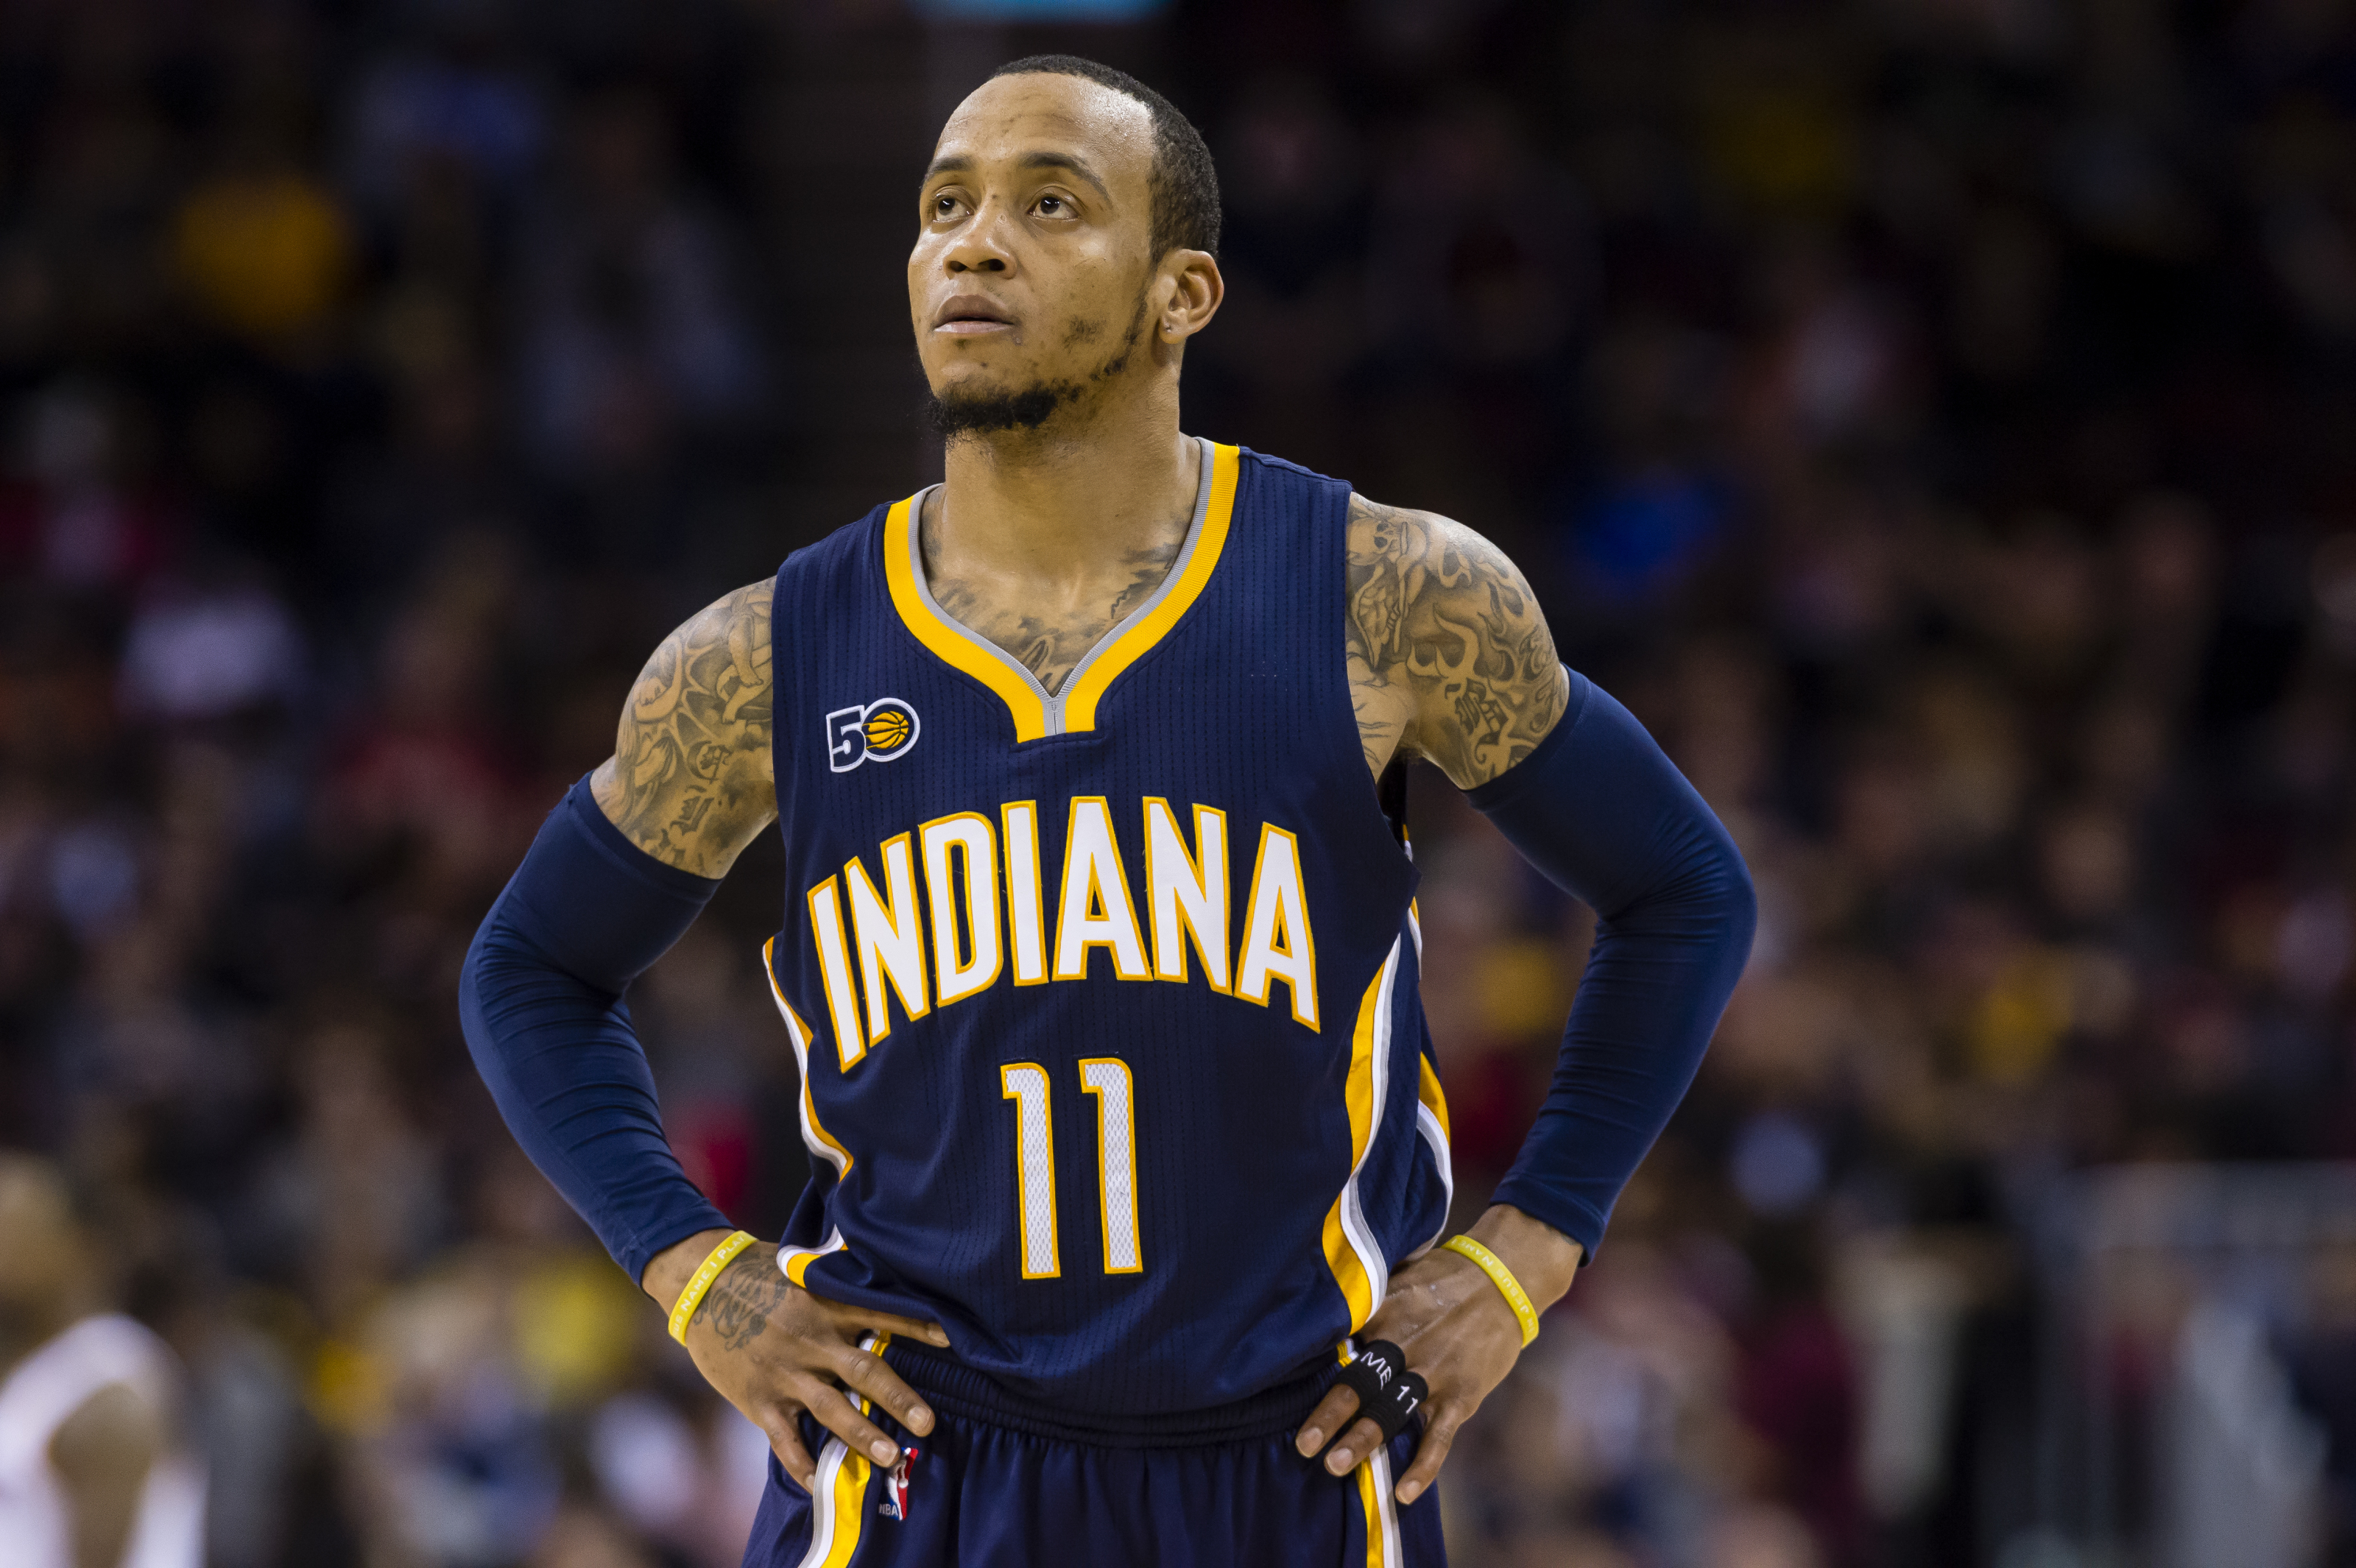 Monta Ellis: What are the chances of an NBA comeback?